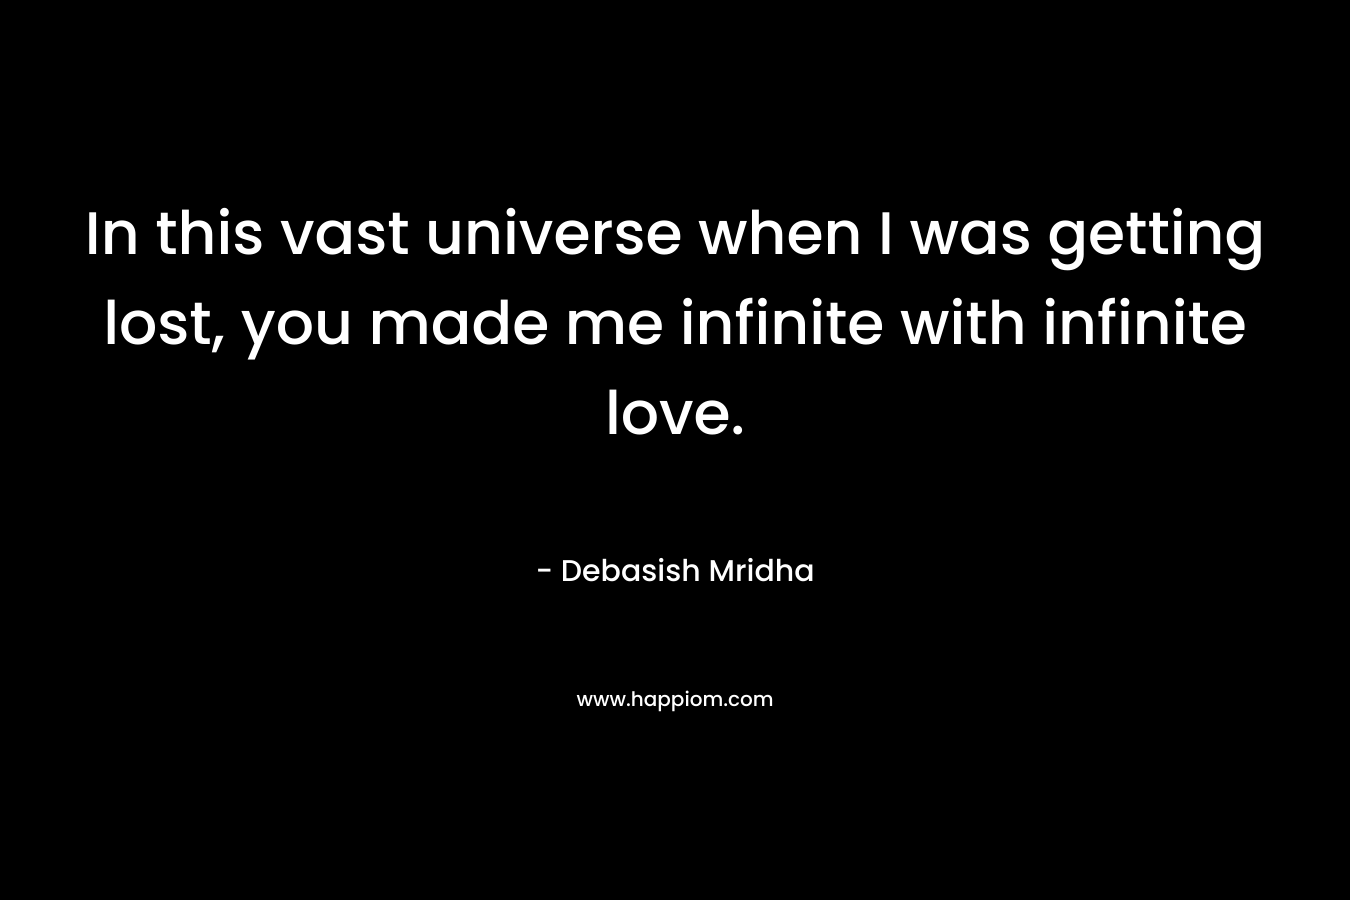 In this vast universe when I was getting lost, you made me infinite with infinite love.